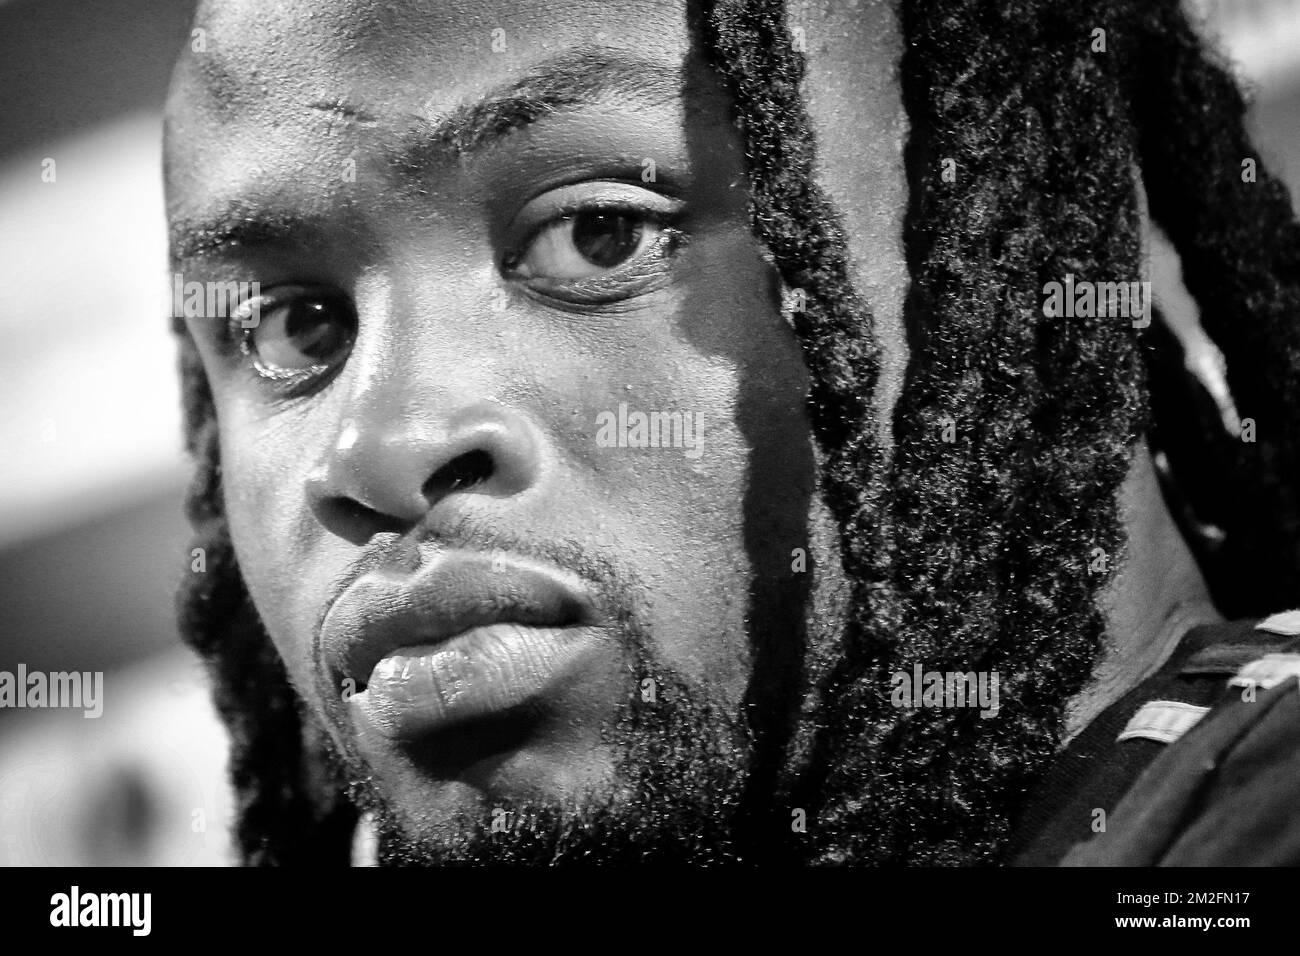 Belgium's Jordan Lukaku pictured during a press contact with some players of the Belgian national soccer team Red Devils, Wednesday 30 May 2018, in Tubize. The Red Devils started their preparations for the upcoming FIFA World Cup 2018 in Russia. BELGA PHOTO BRUNO FAHY Stock Photo